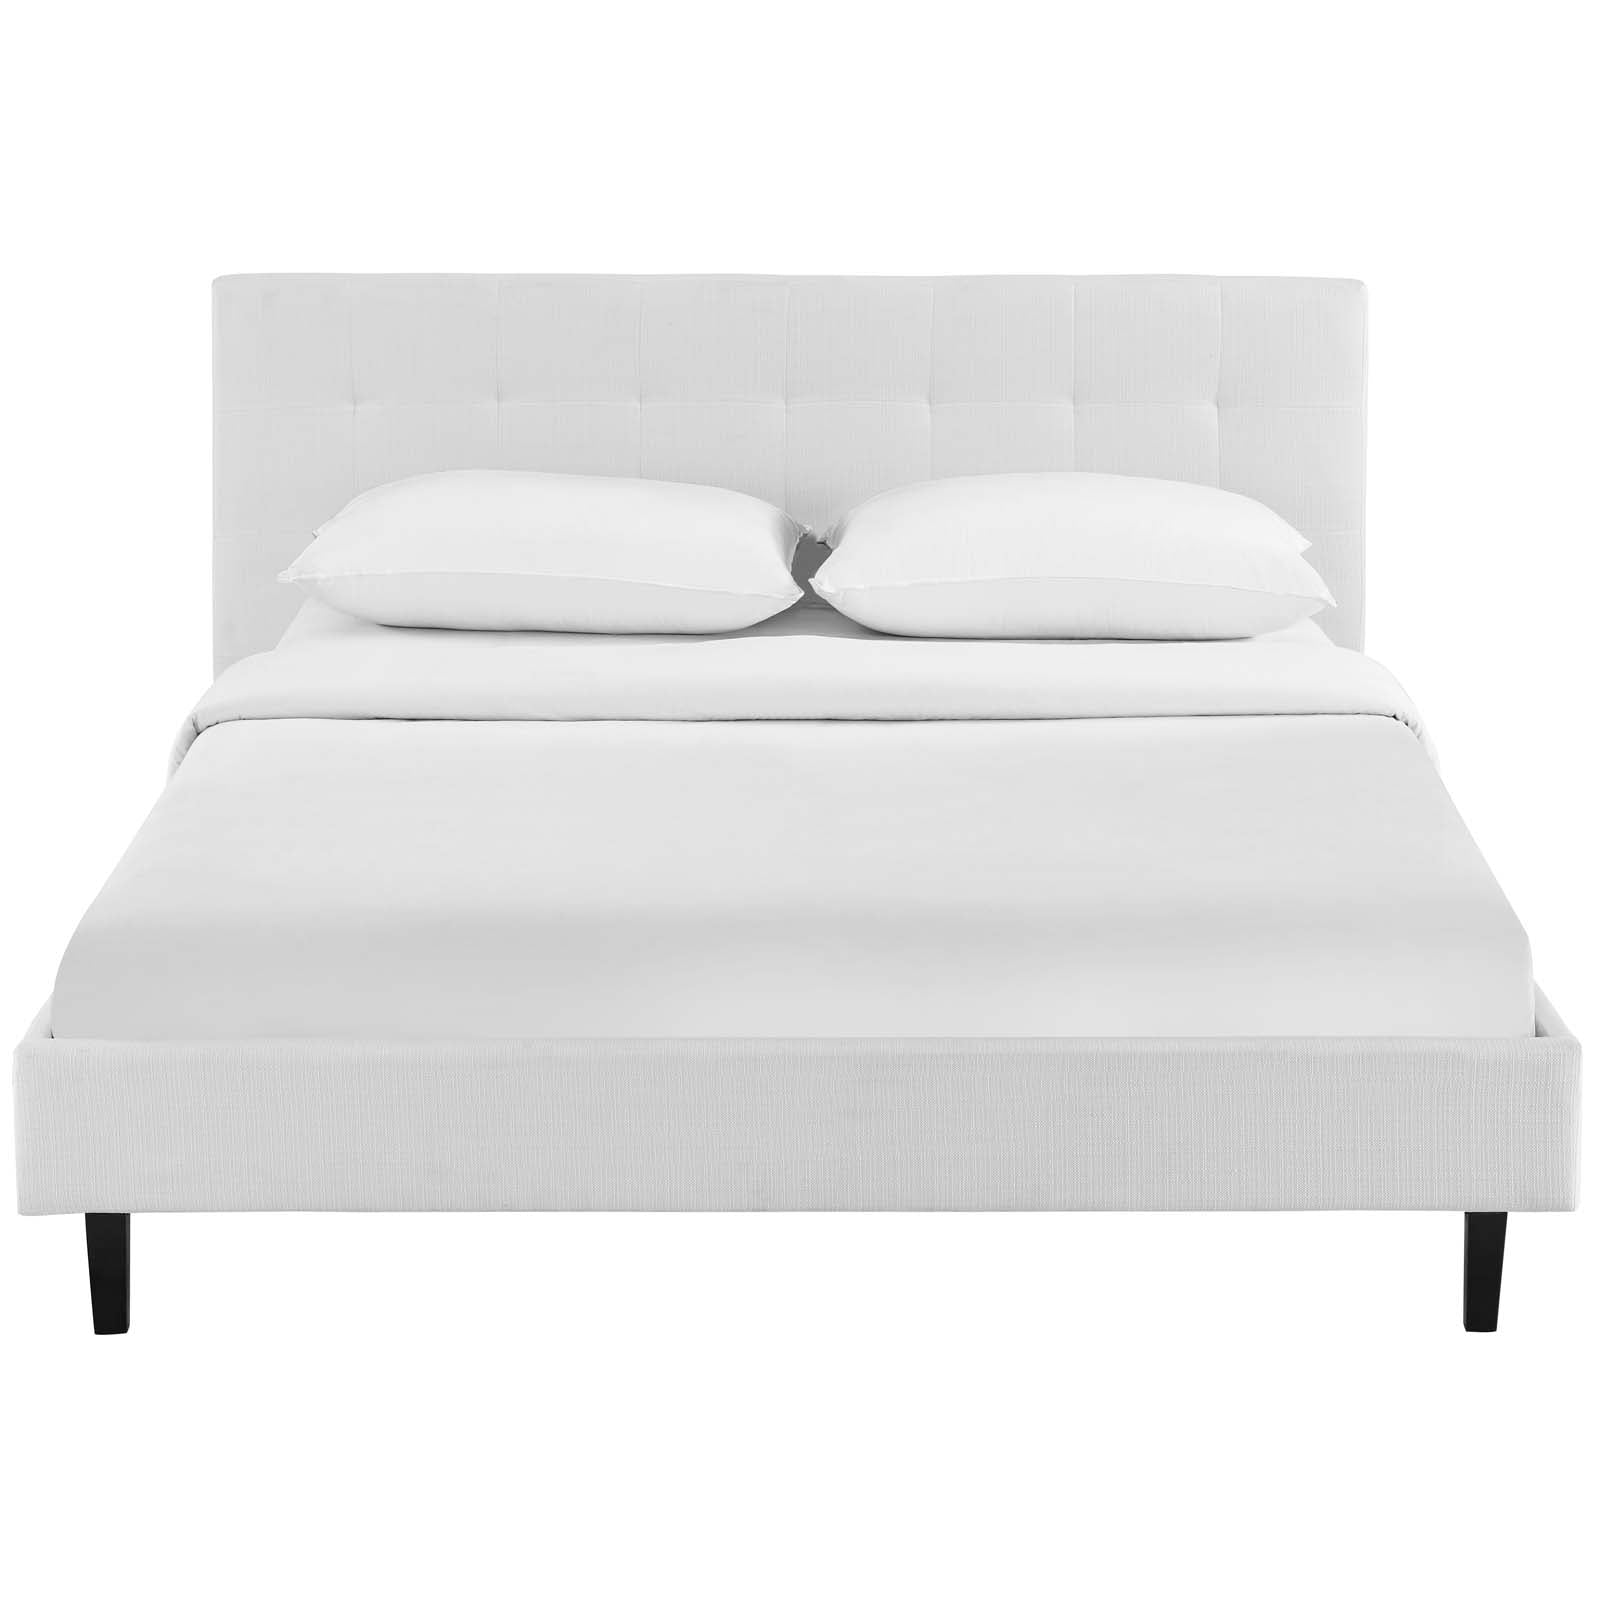 Modway Beds - Linnea Full Bed White